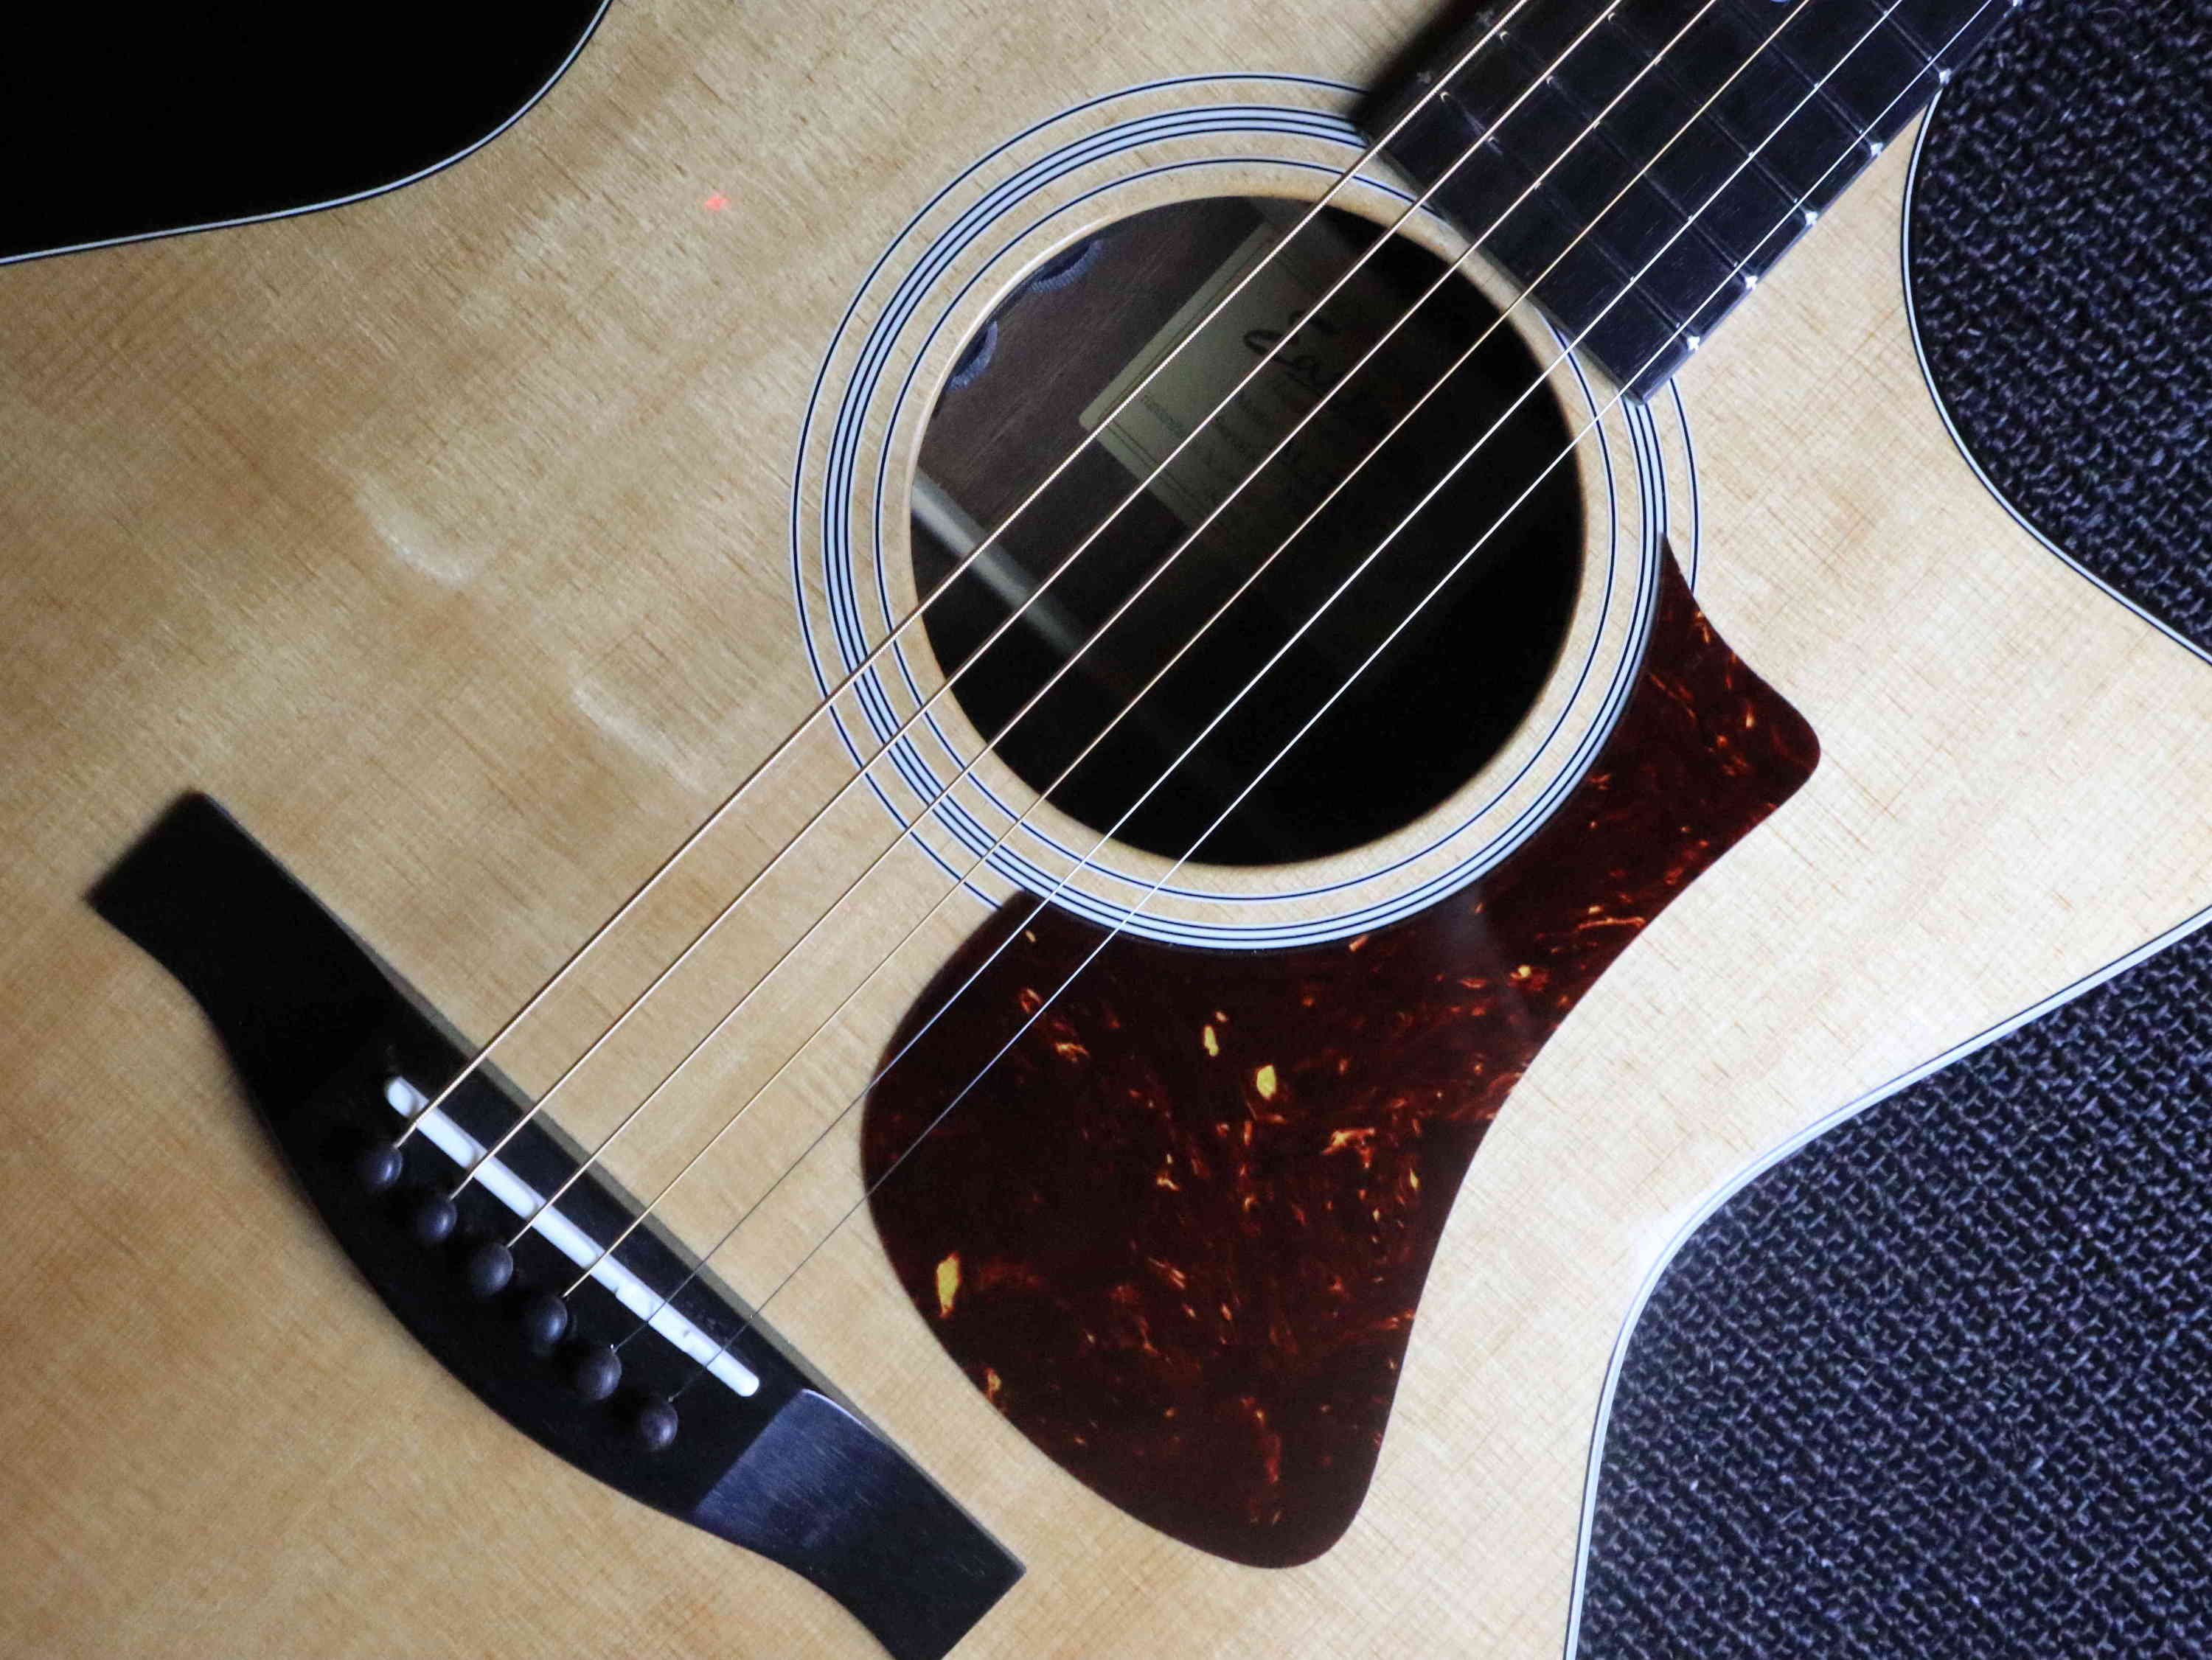 Eastman AC122-1CE, Electro Acoustic Guitar for sale at Richards Guitars.